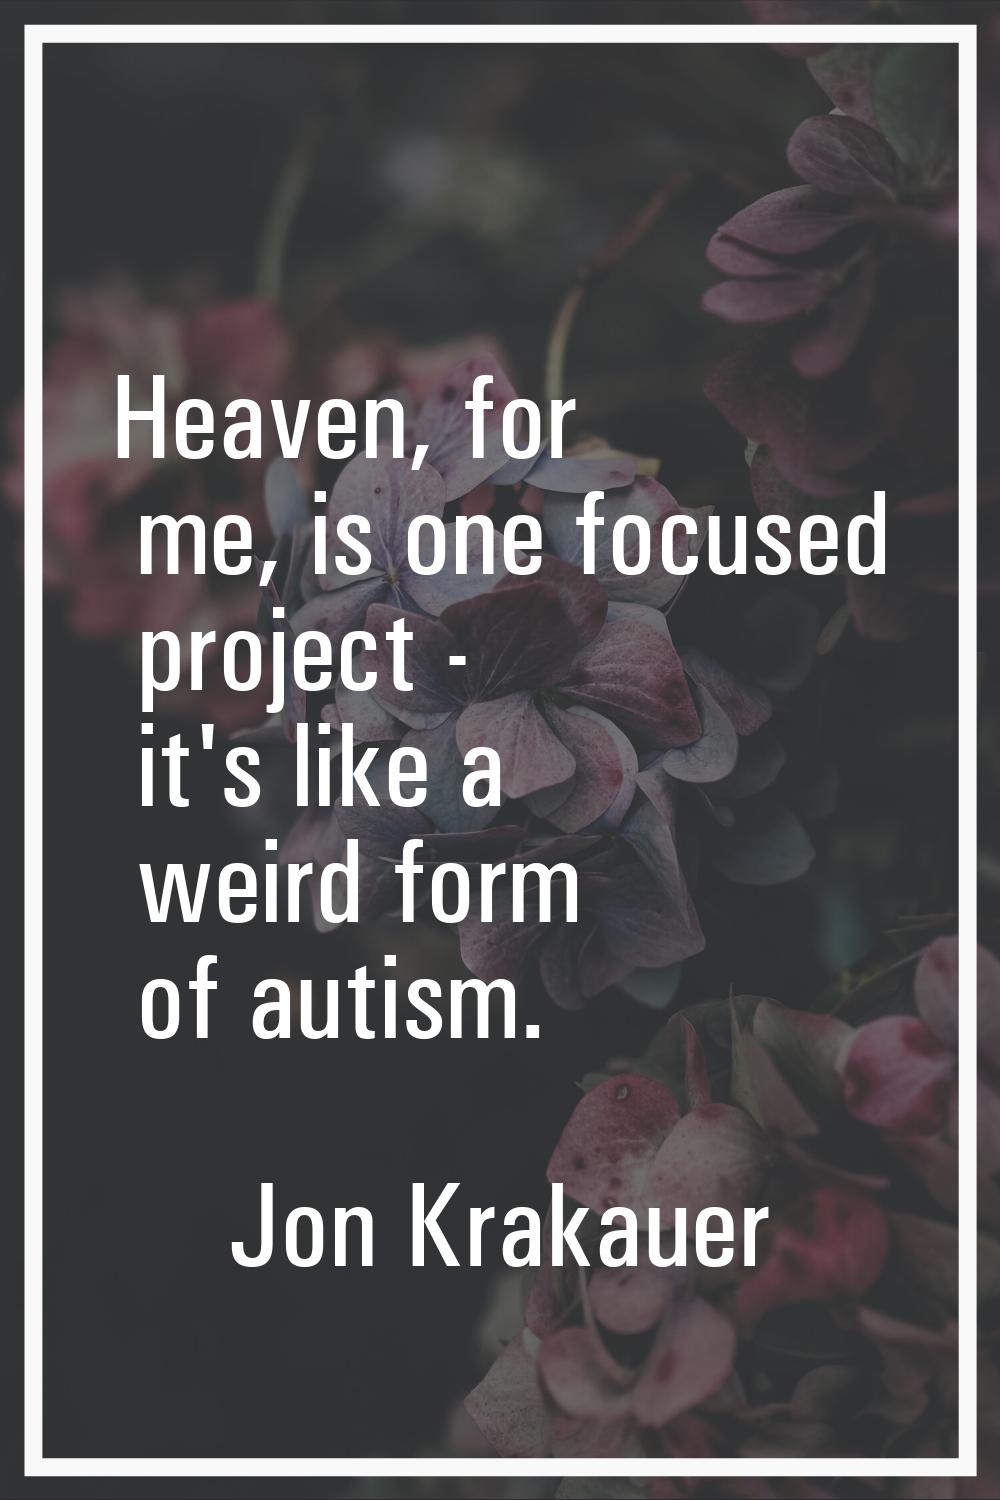 Heaven, for me, is one focused project - it's like a weird form of autism.